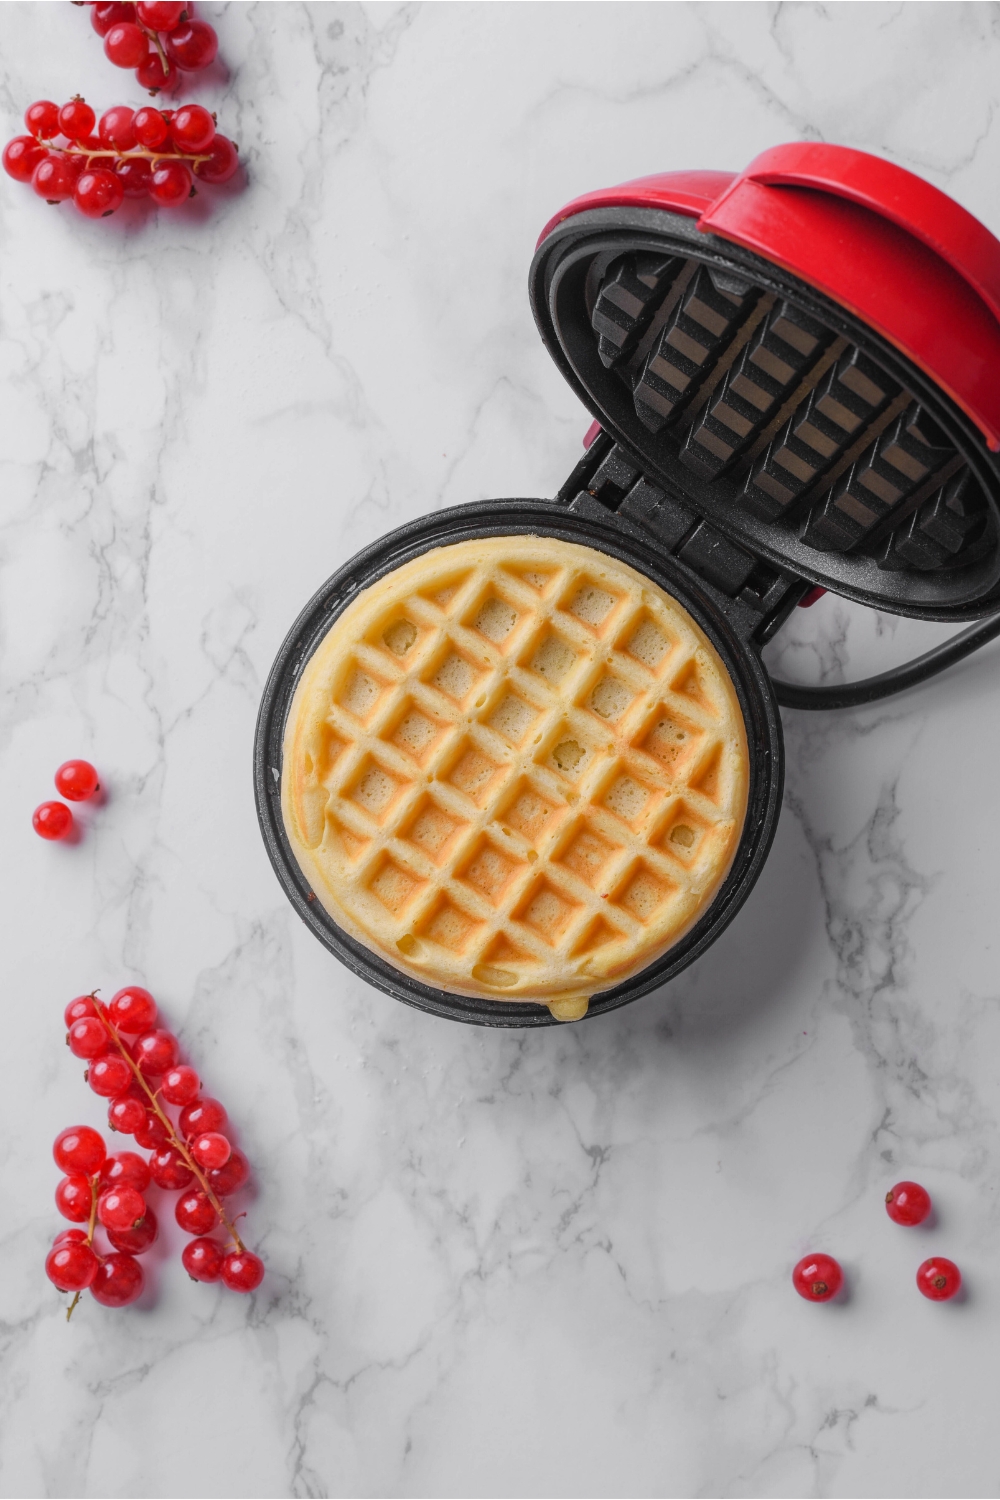 A mini waffle maker cooking the waffles.